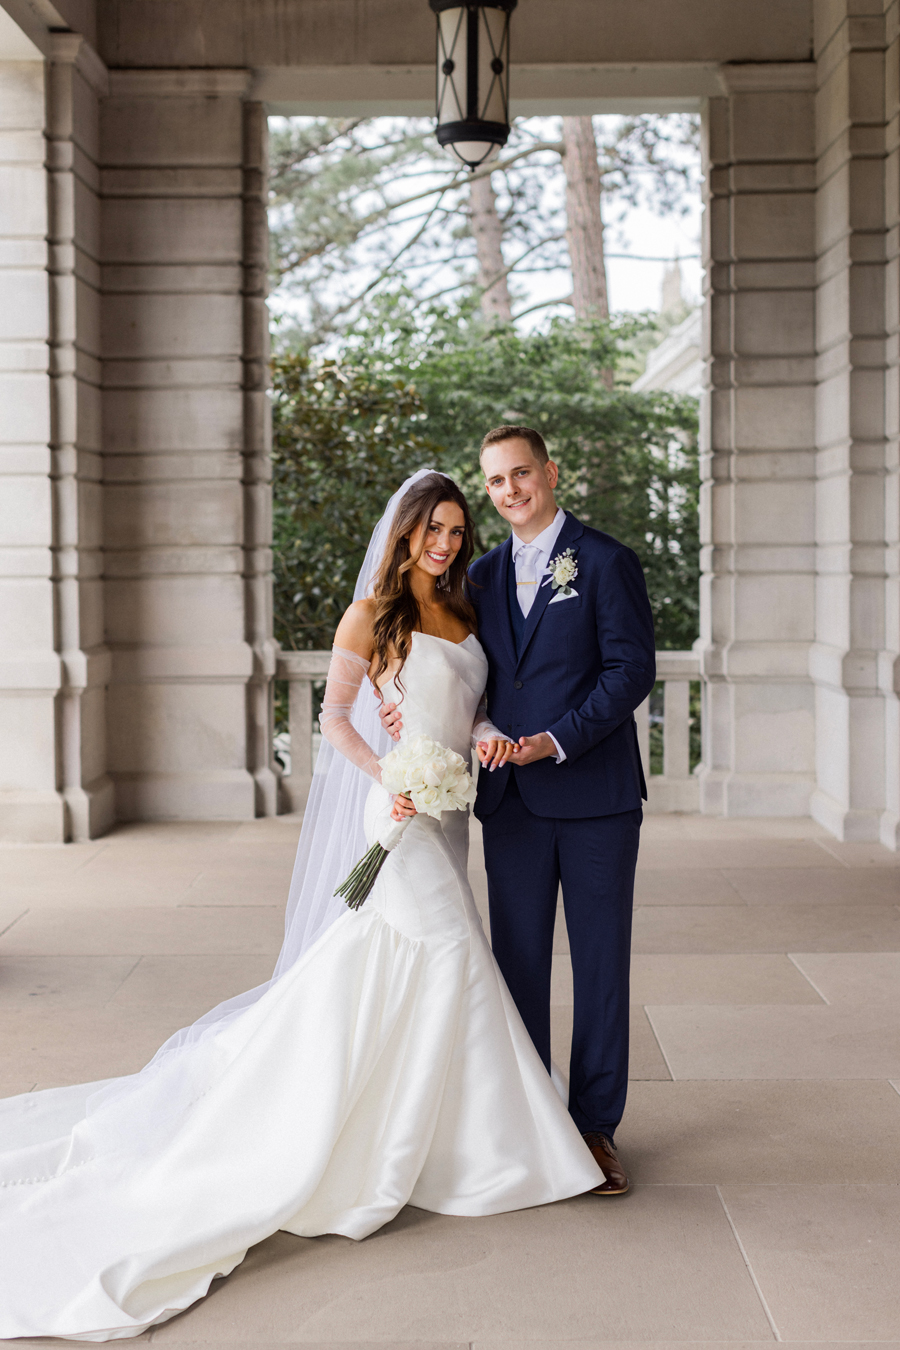 The bride and groom do a First Look at their The Atrium on Tenth wedding in Columbia, Missouri by Love Tree Studios.